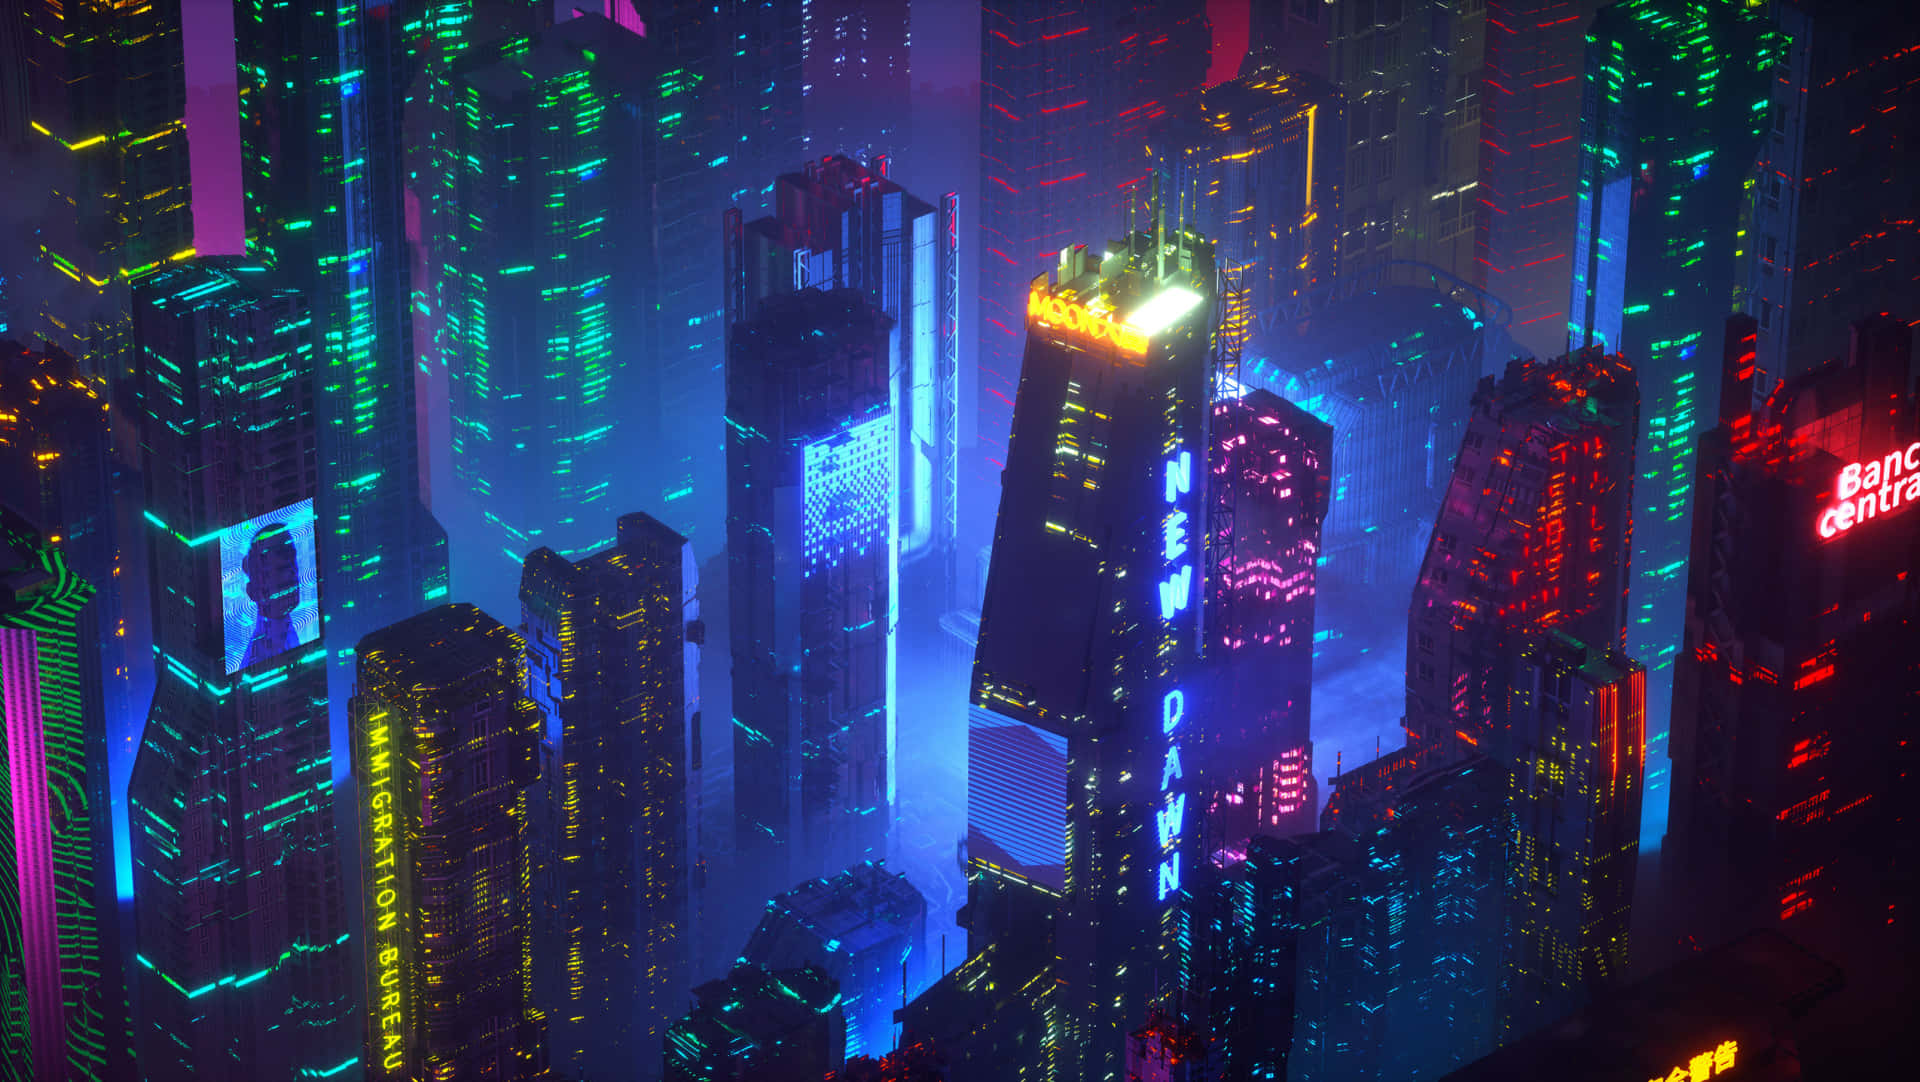 Welcome to the beautiful and vibrant nightlife of Neon City. Wallpaper